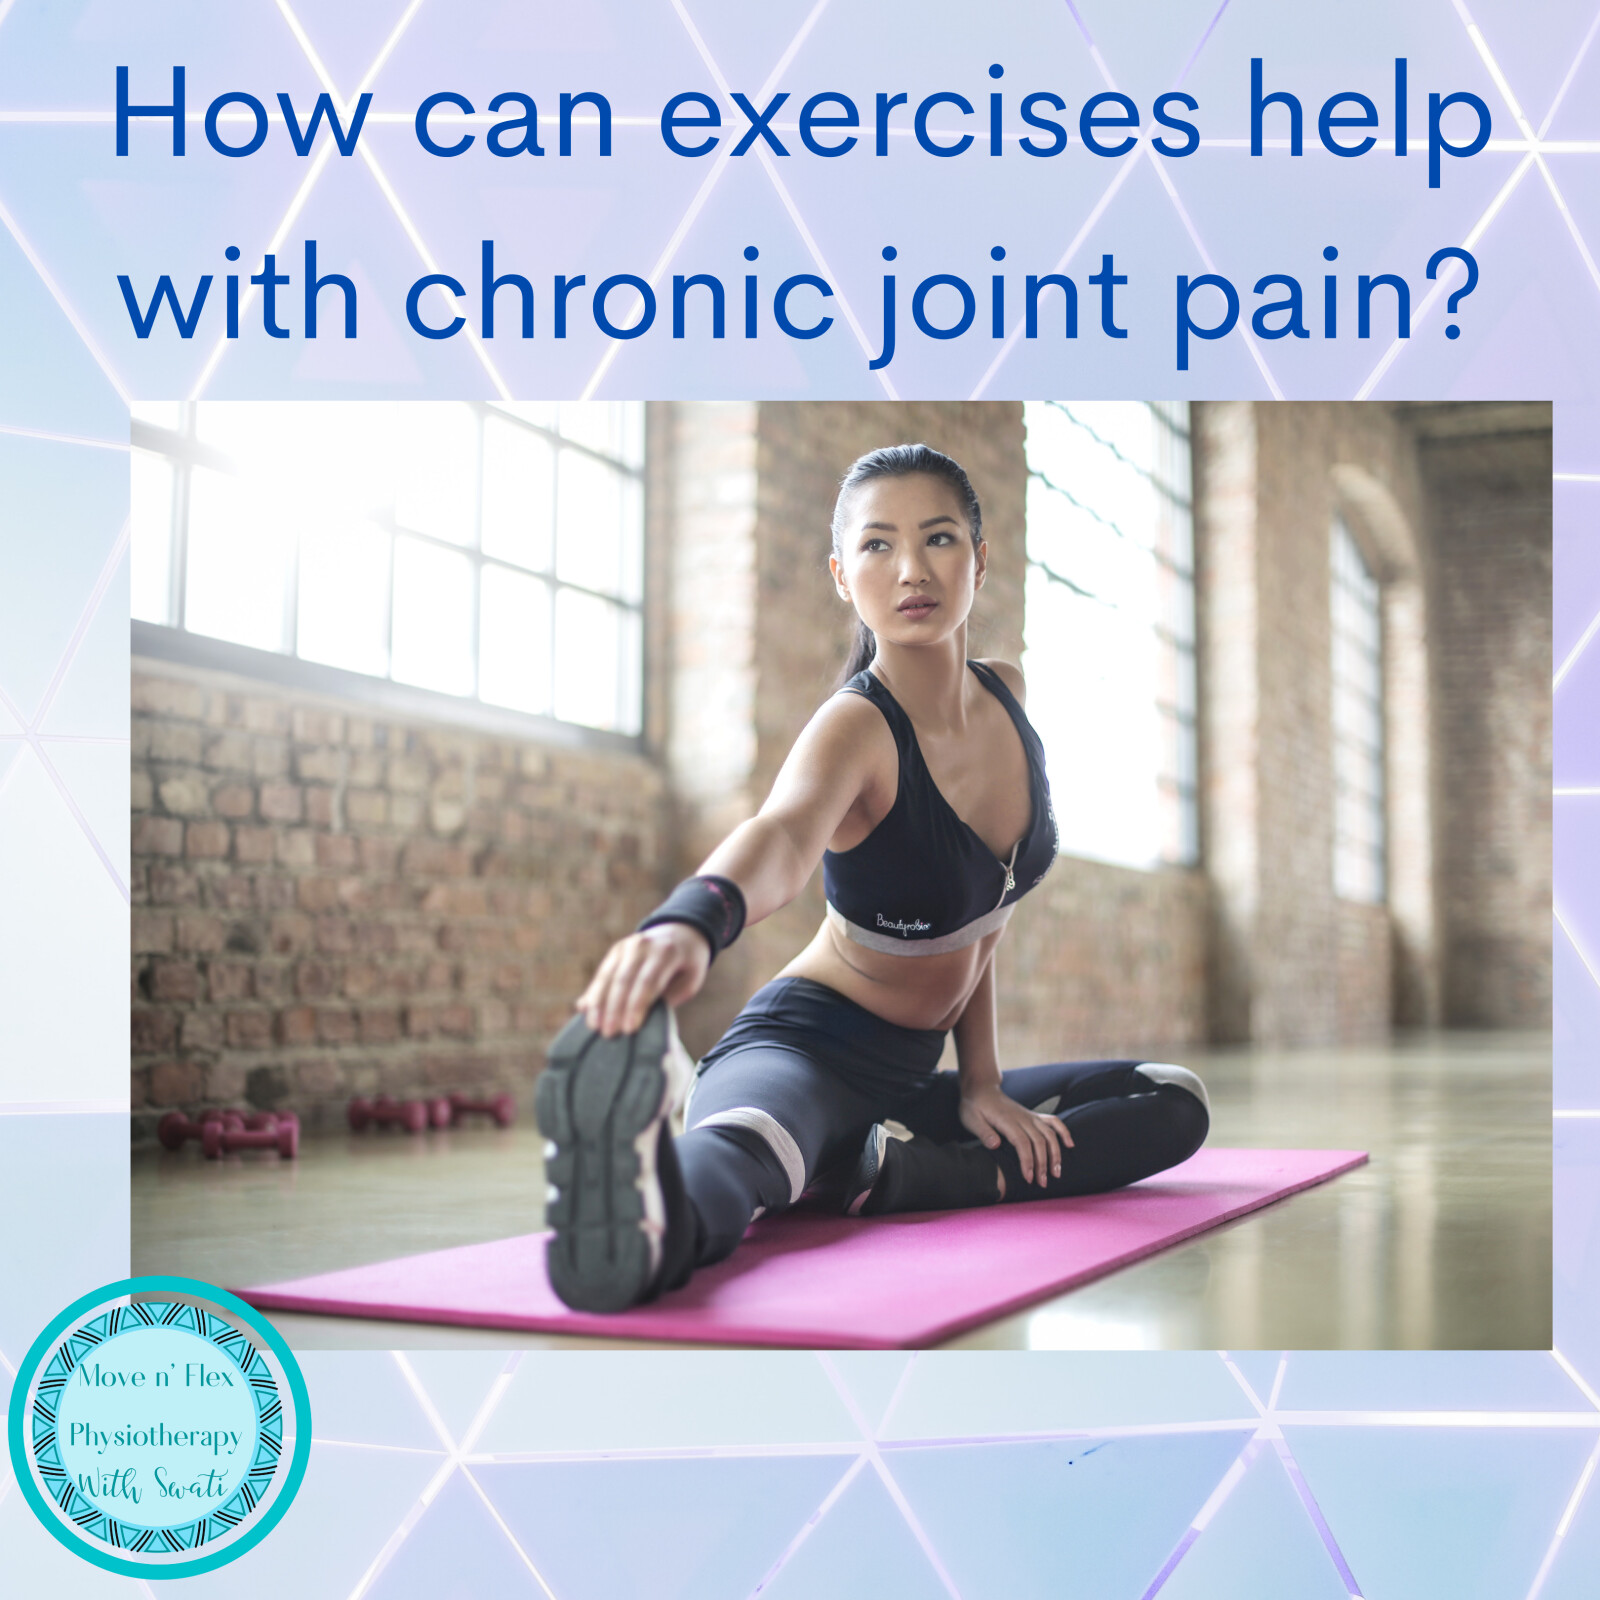 How can exercises help with chronic pain?